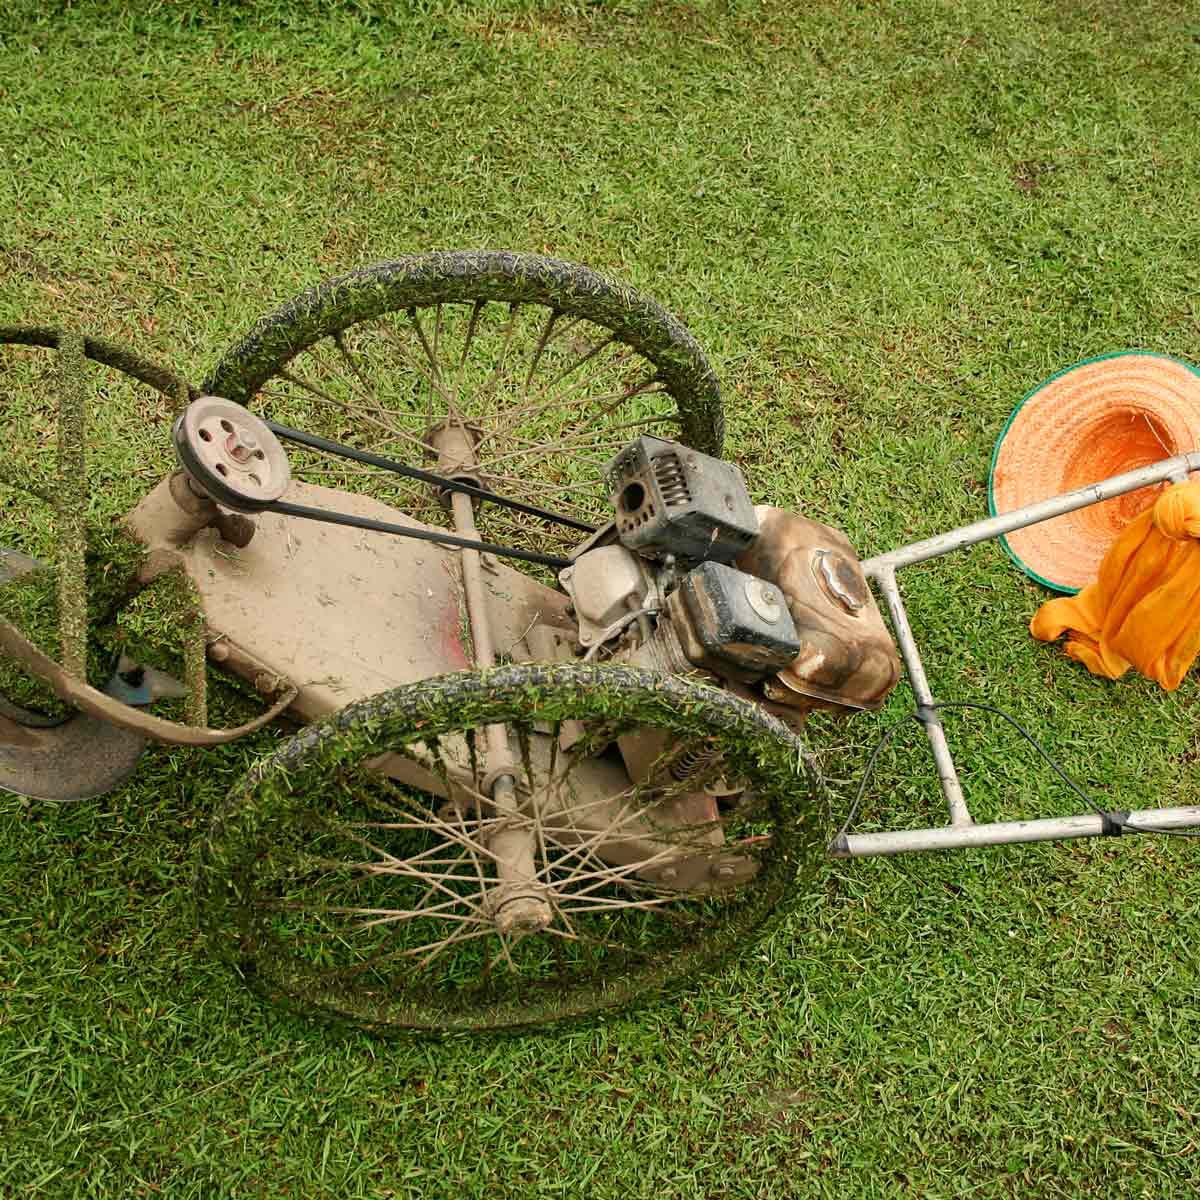 10 Vintage Lawn Mowers You Just Have to See | Family Handyman